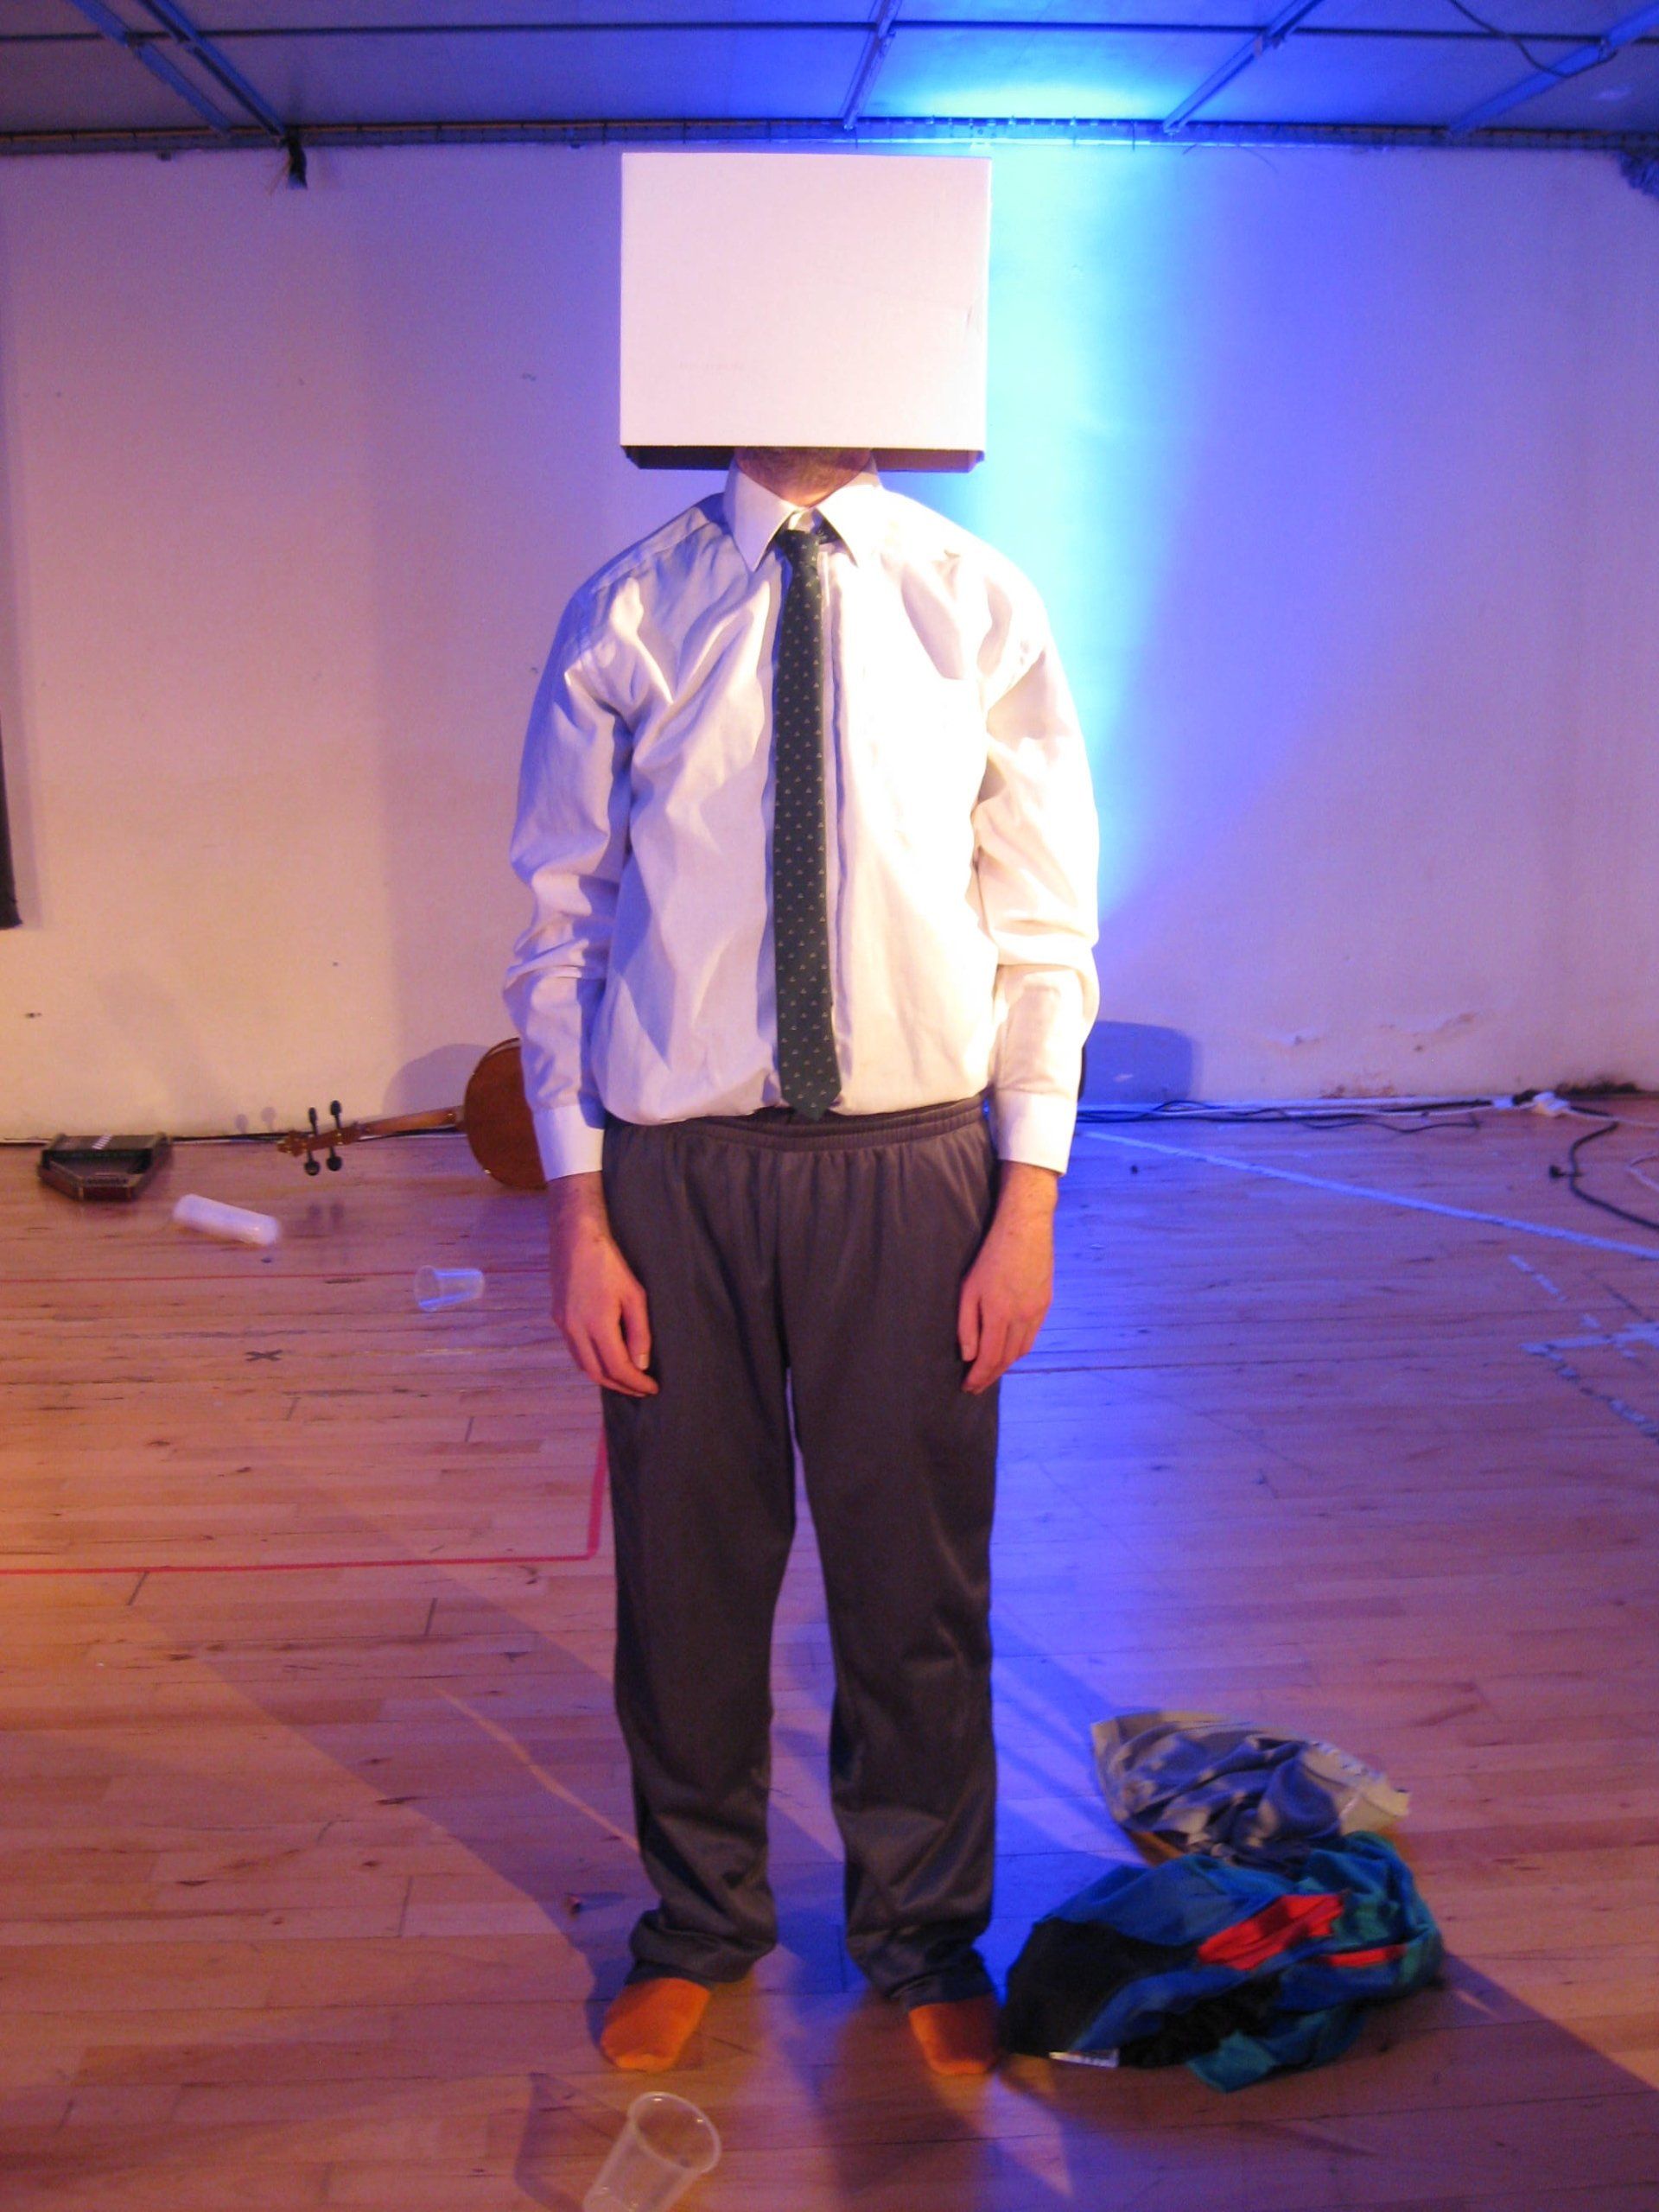 a man in a white shirt and tie has a box on his head